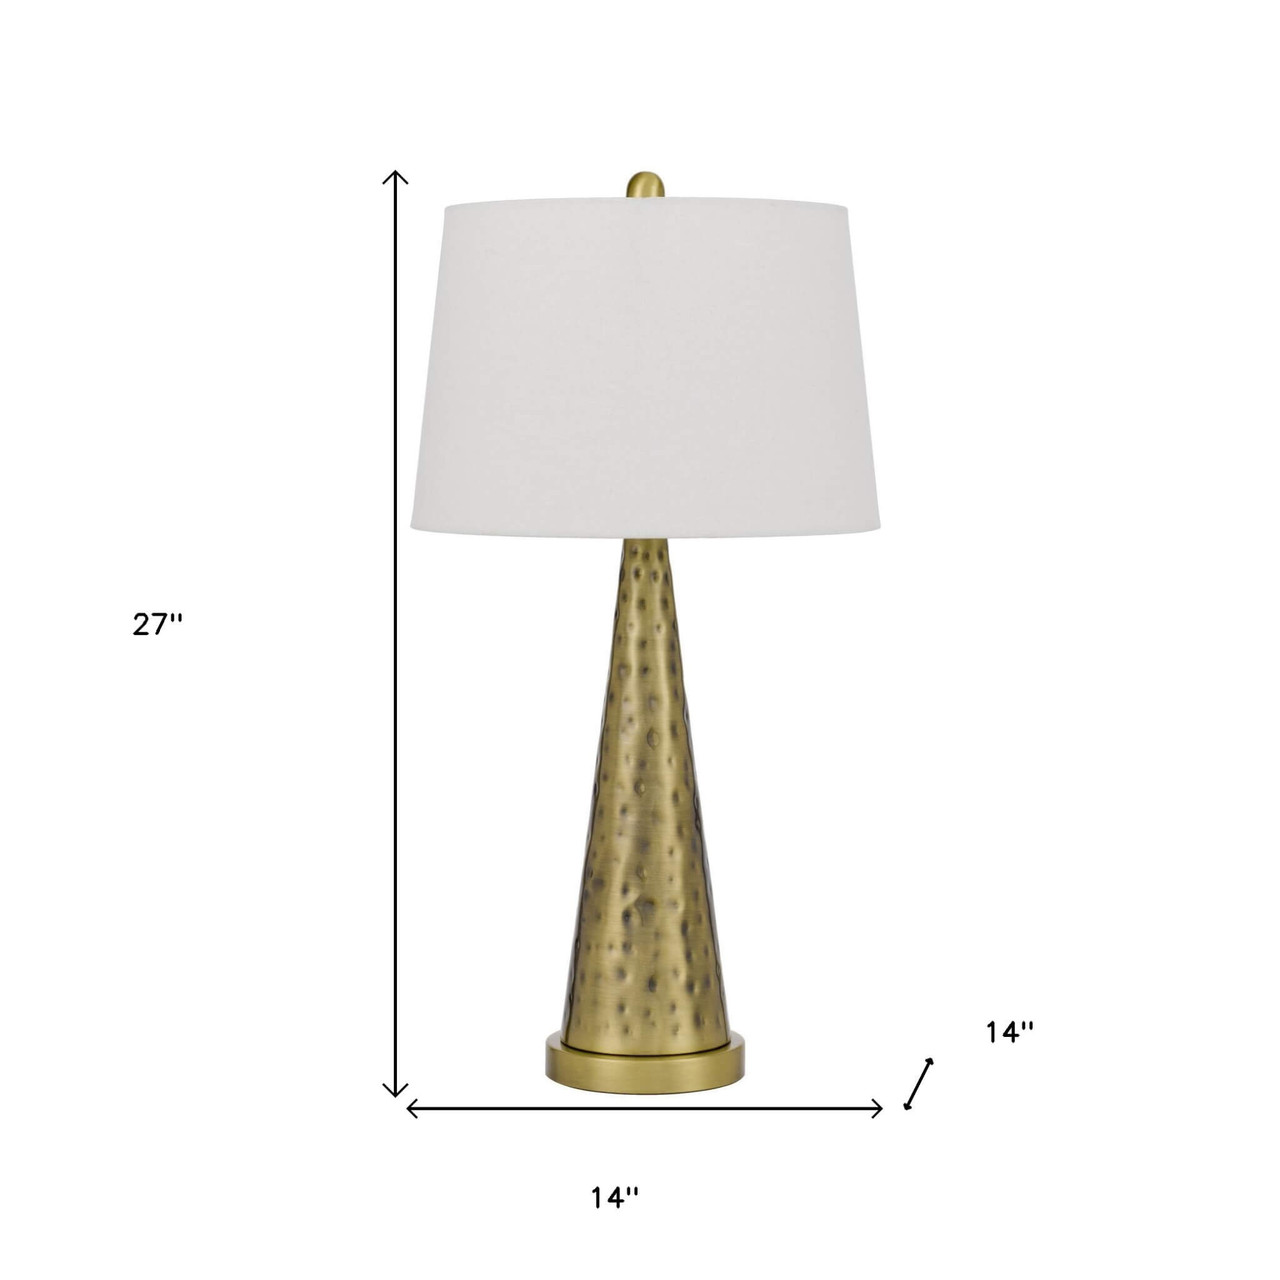 27" Antiqued Brass Metal Table Lamp With White Empire Shade - Chicken Pieces